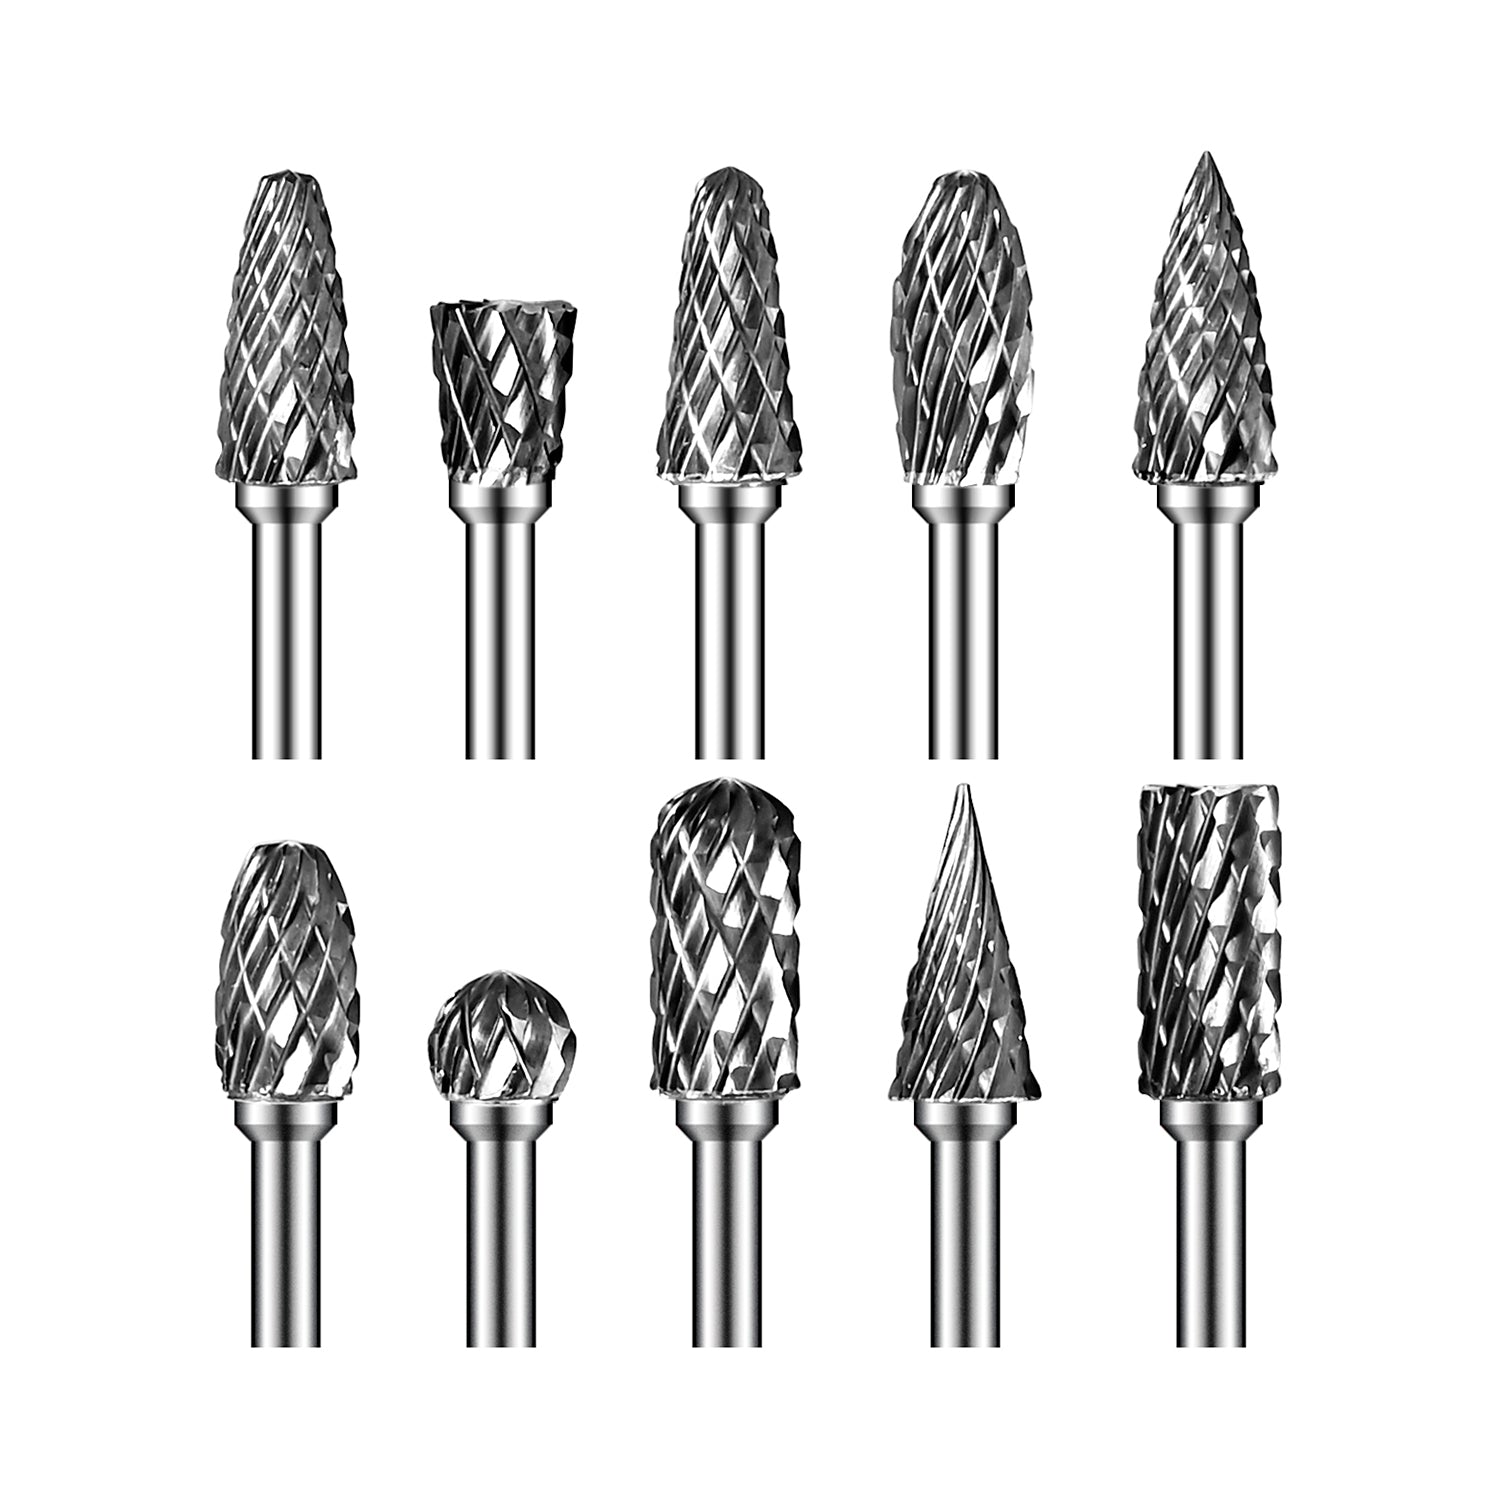 Wood Carving Drill Bits Set For Rotary Tool, 5pcs Wood Engraving Tool For  Dremel Accessory, Diy Woodworking Bits With 1/8 Shank For Carving Grinding  E